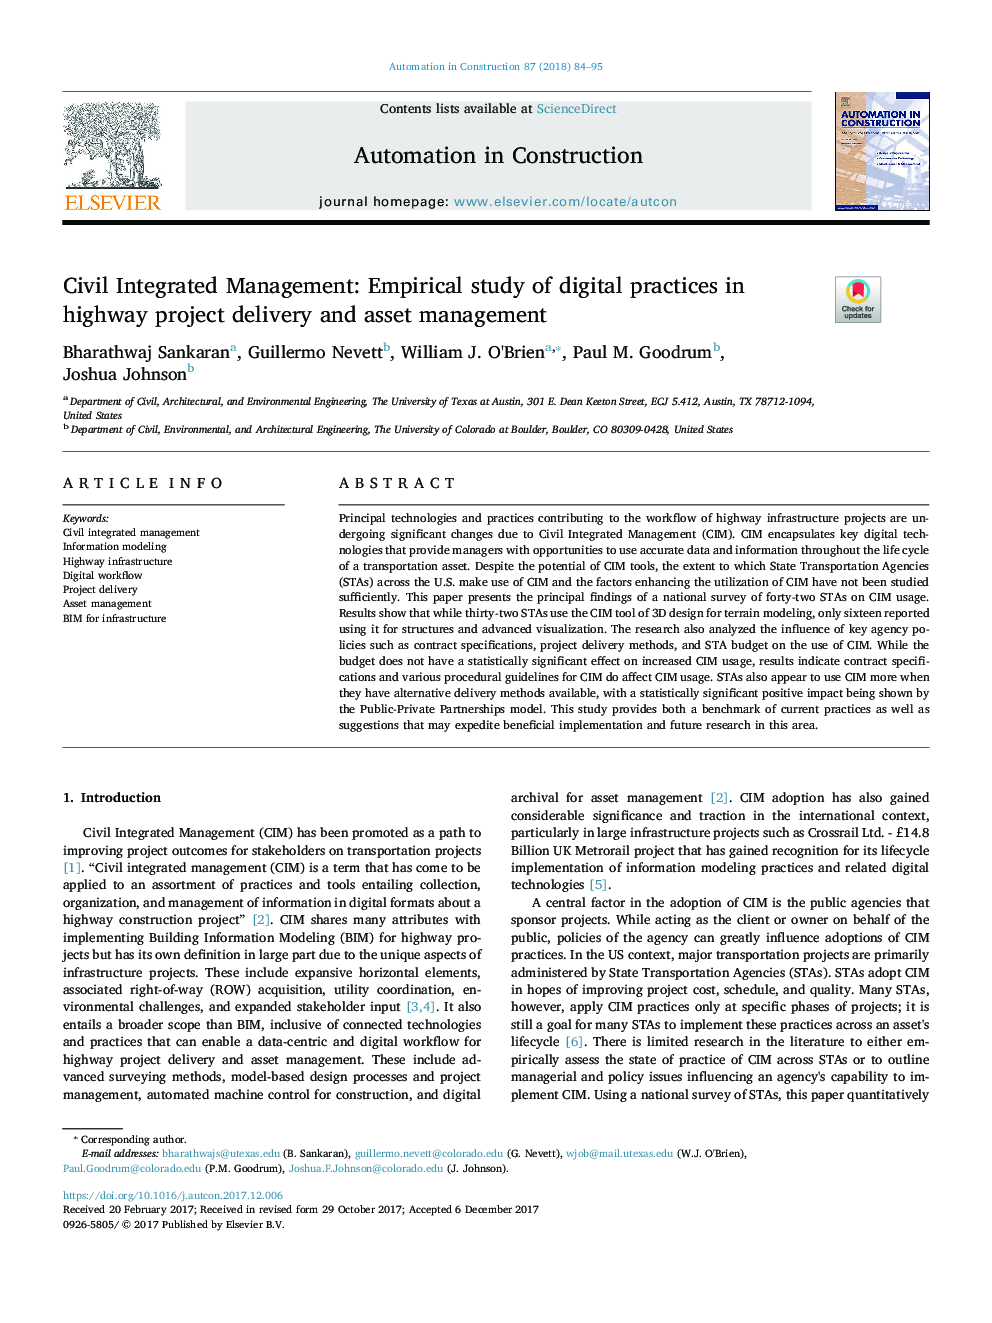 Civil Integrated Management: Empirical study of digital practices in highway project delivery and asset management